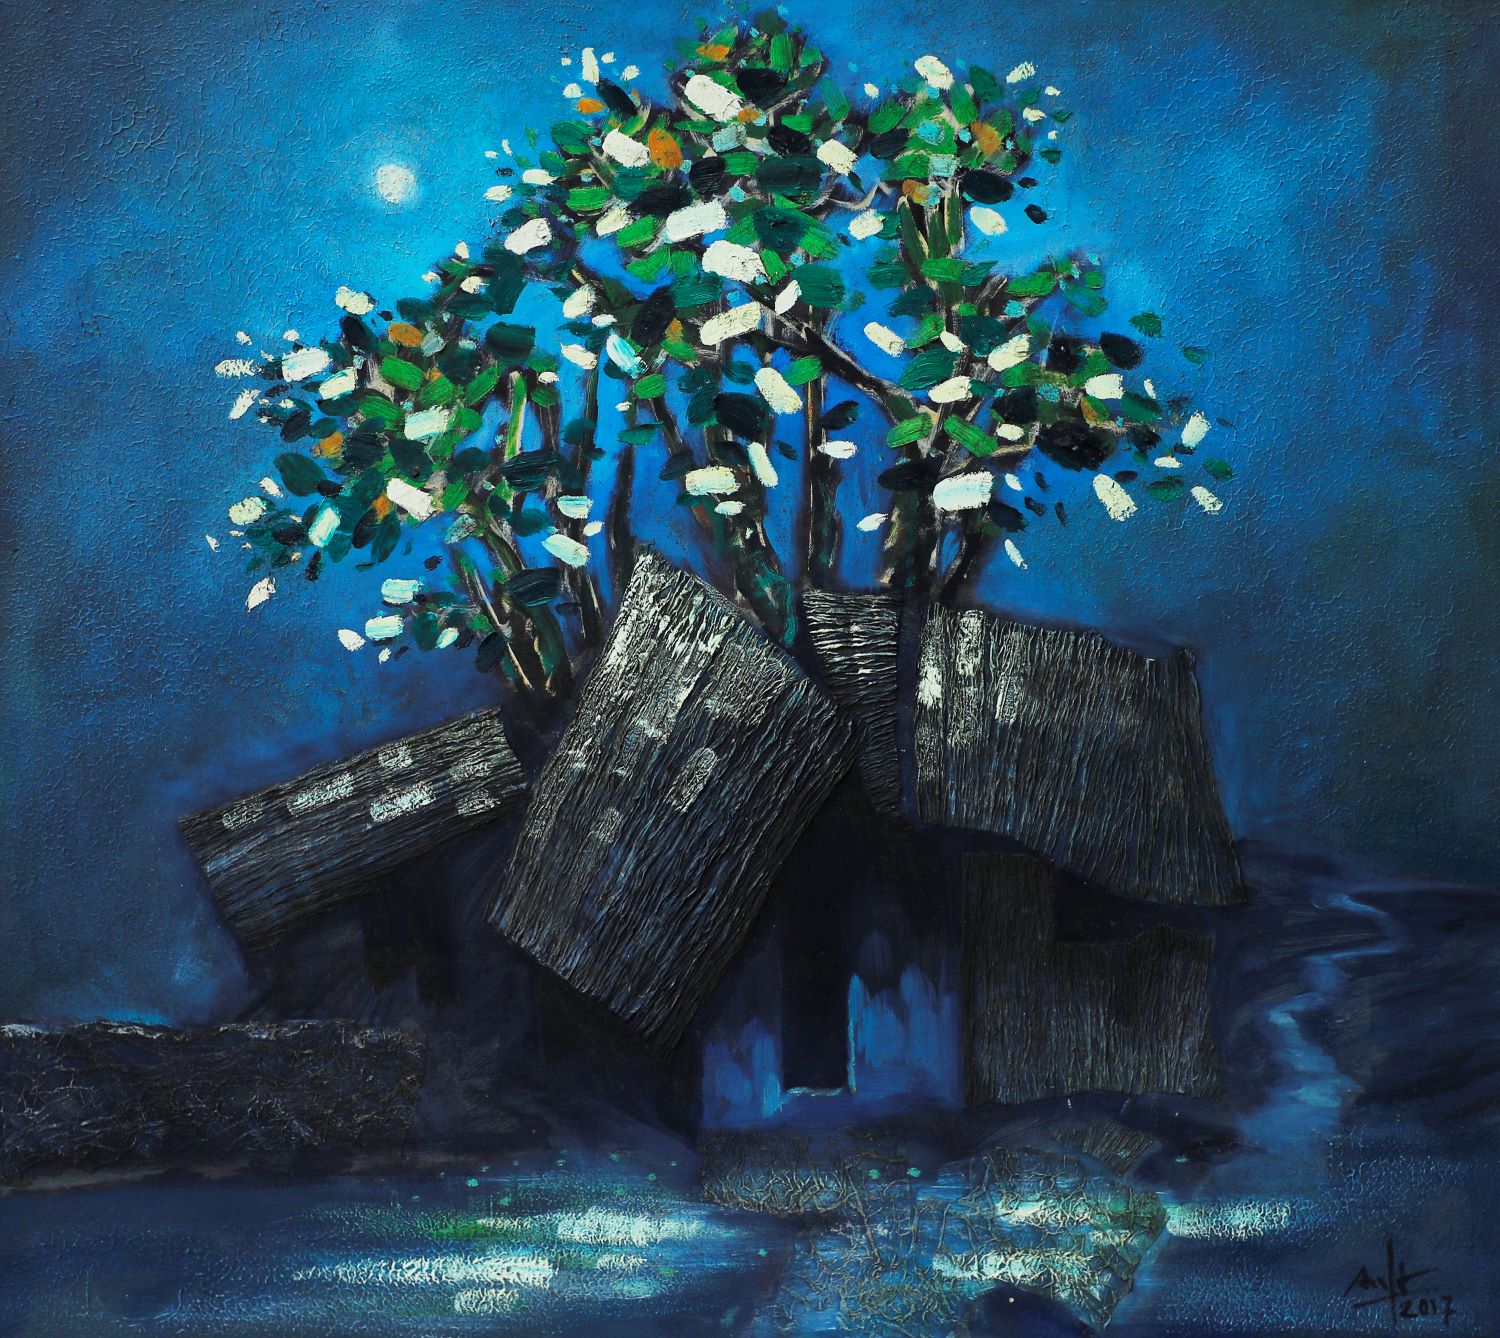 Night of Blue Moon - Vietnamese Oil Painting by Artist Dau Quang Anh